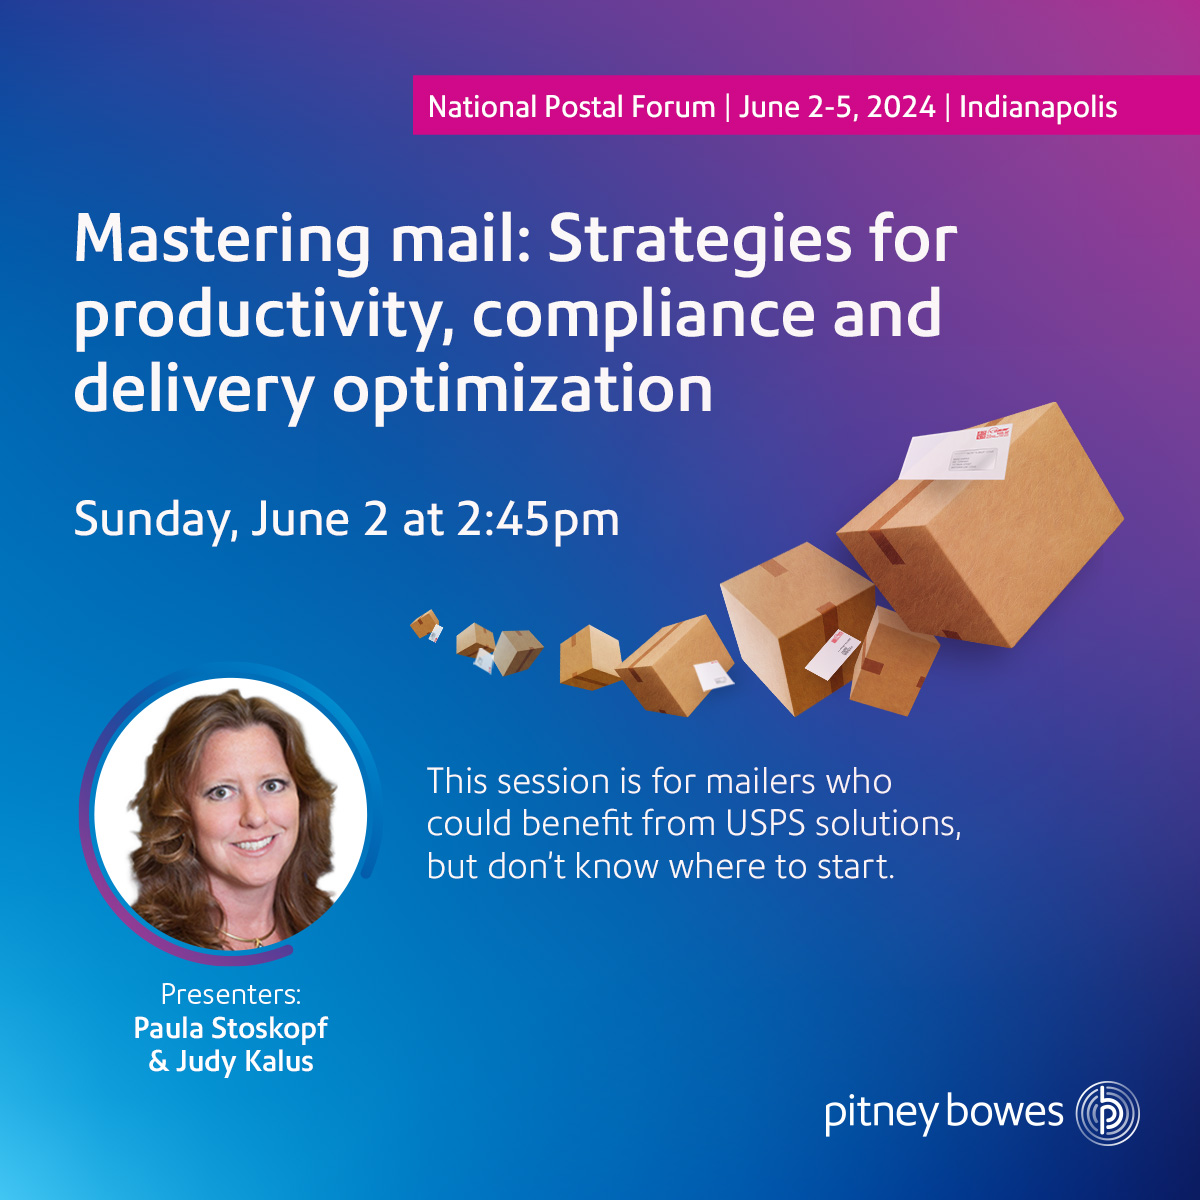 Are you ready to start using a #USPS solution but don't know where to start? Then this is the session for you. Learn more: spr.ly/6018eBNWq #npf #npf2024 #nationalpostalforum